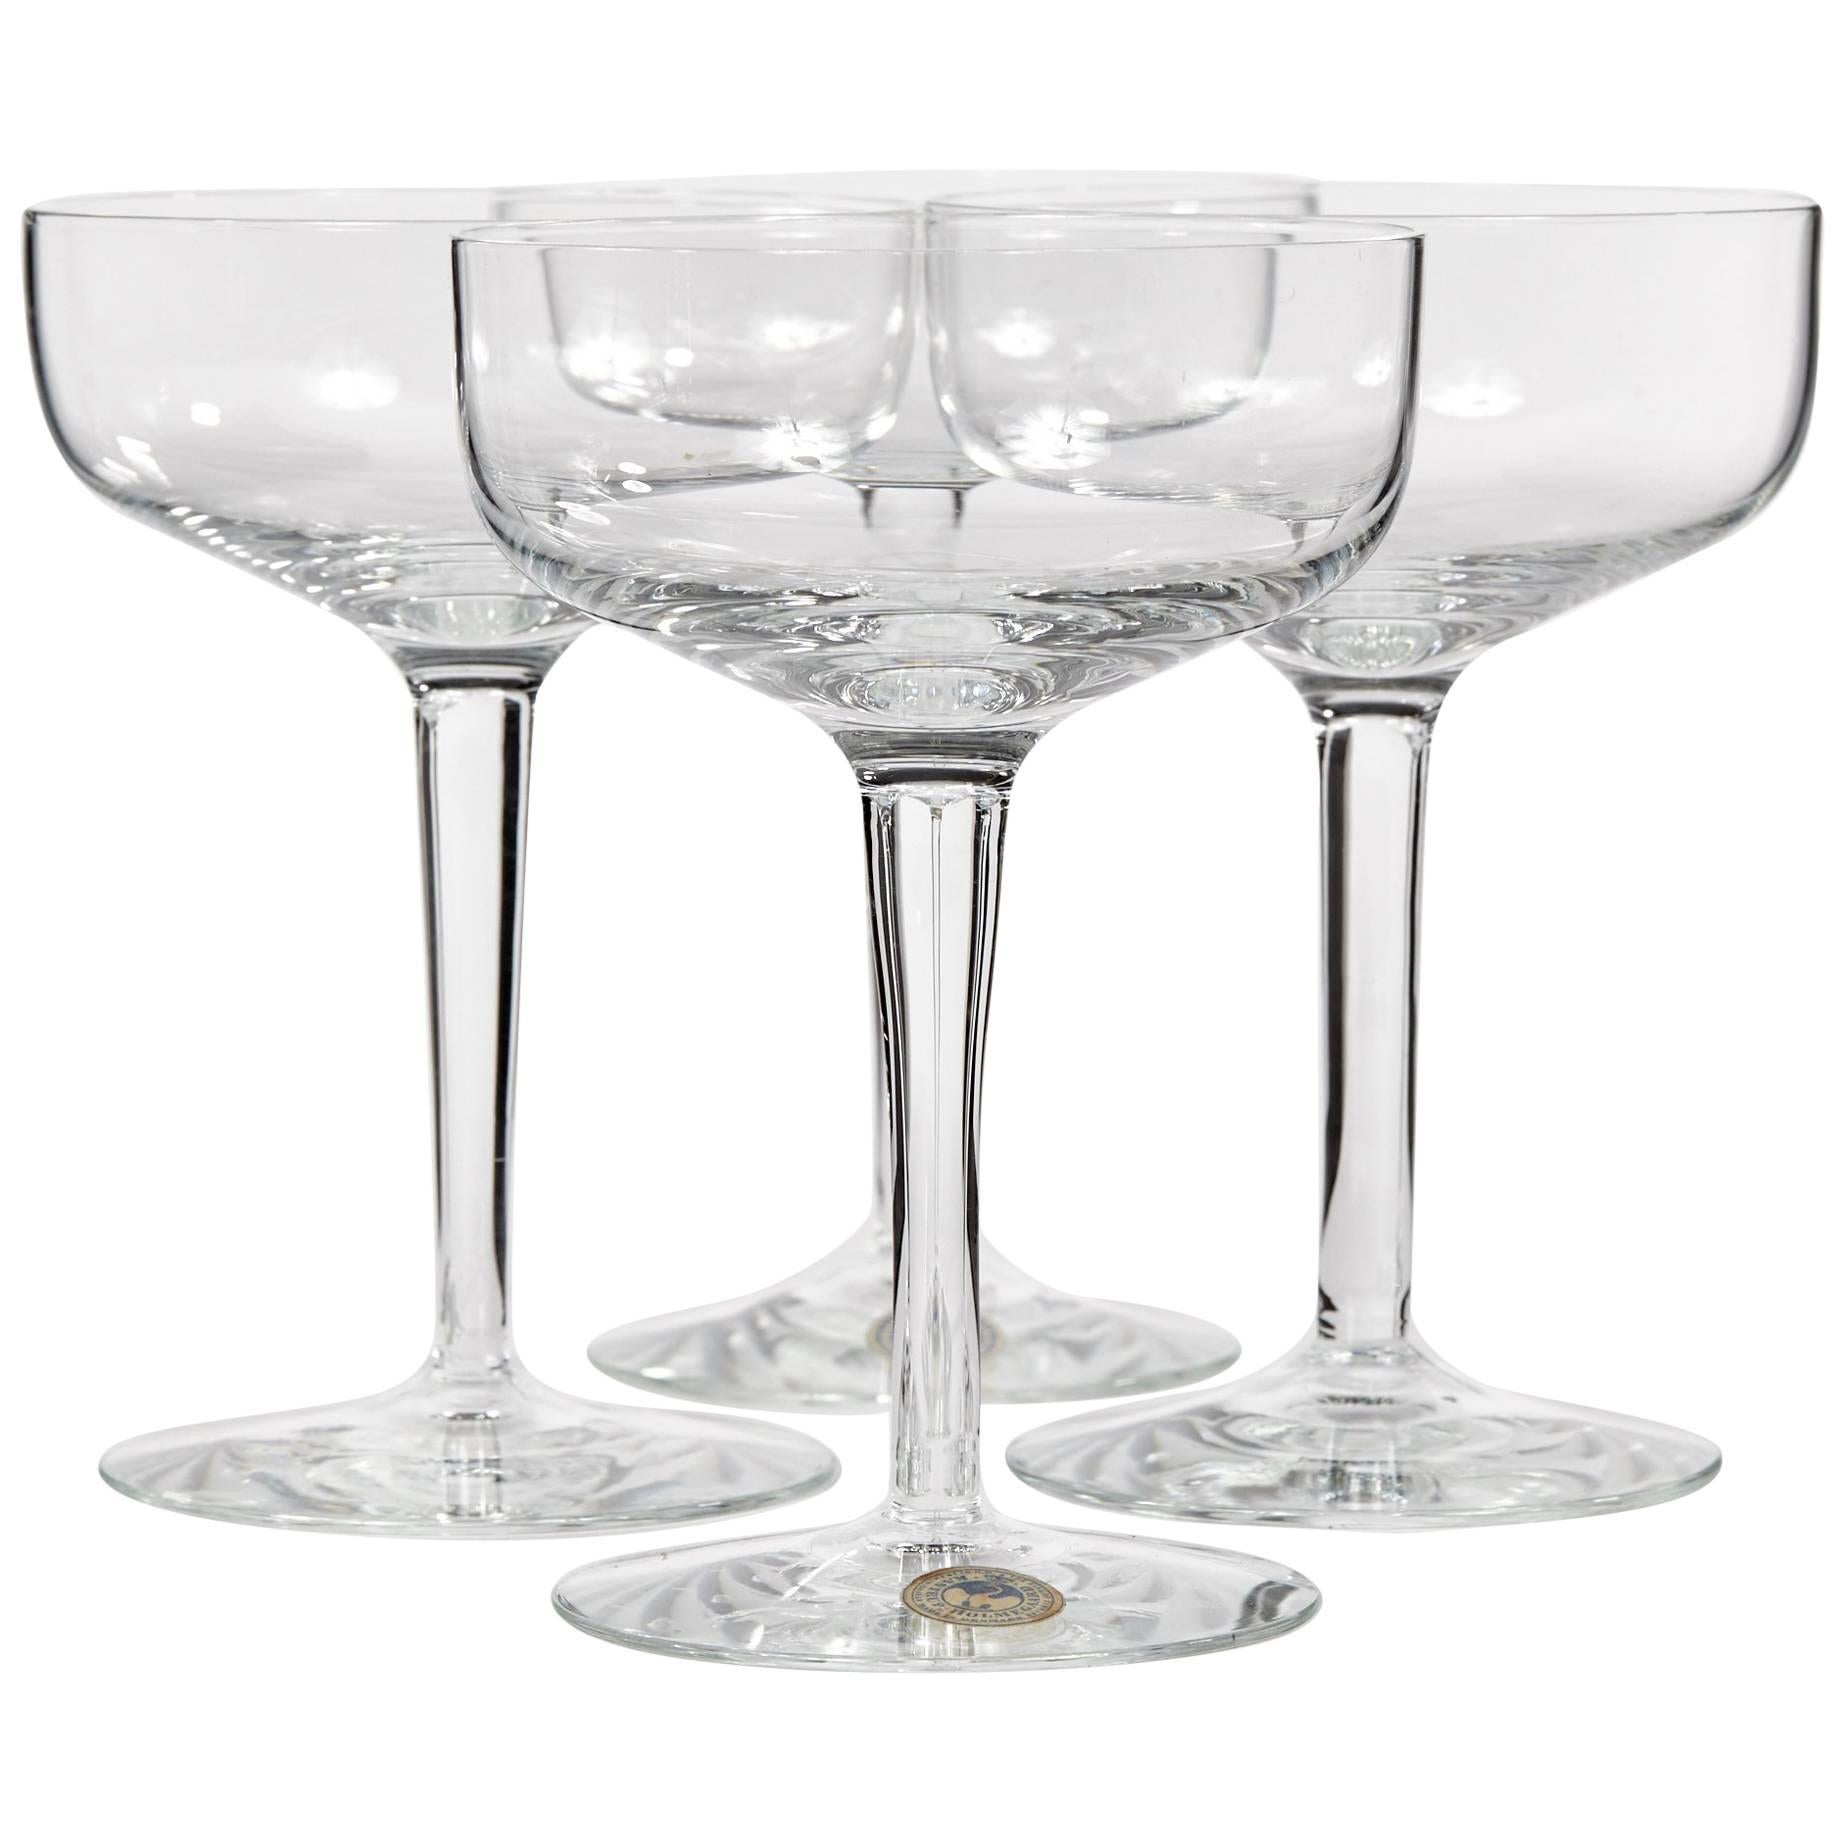 Holmegaard Denmark Glass Coupes, 1960s